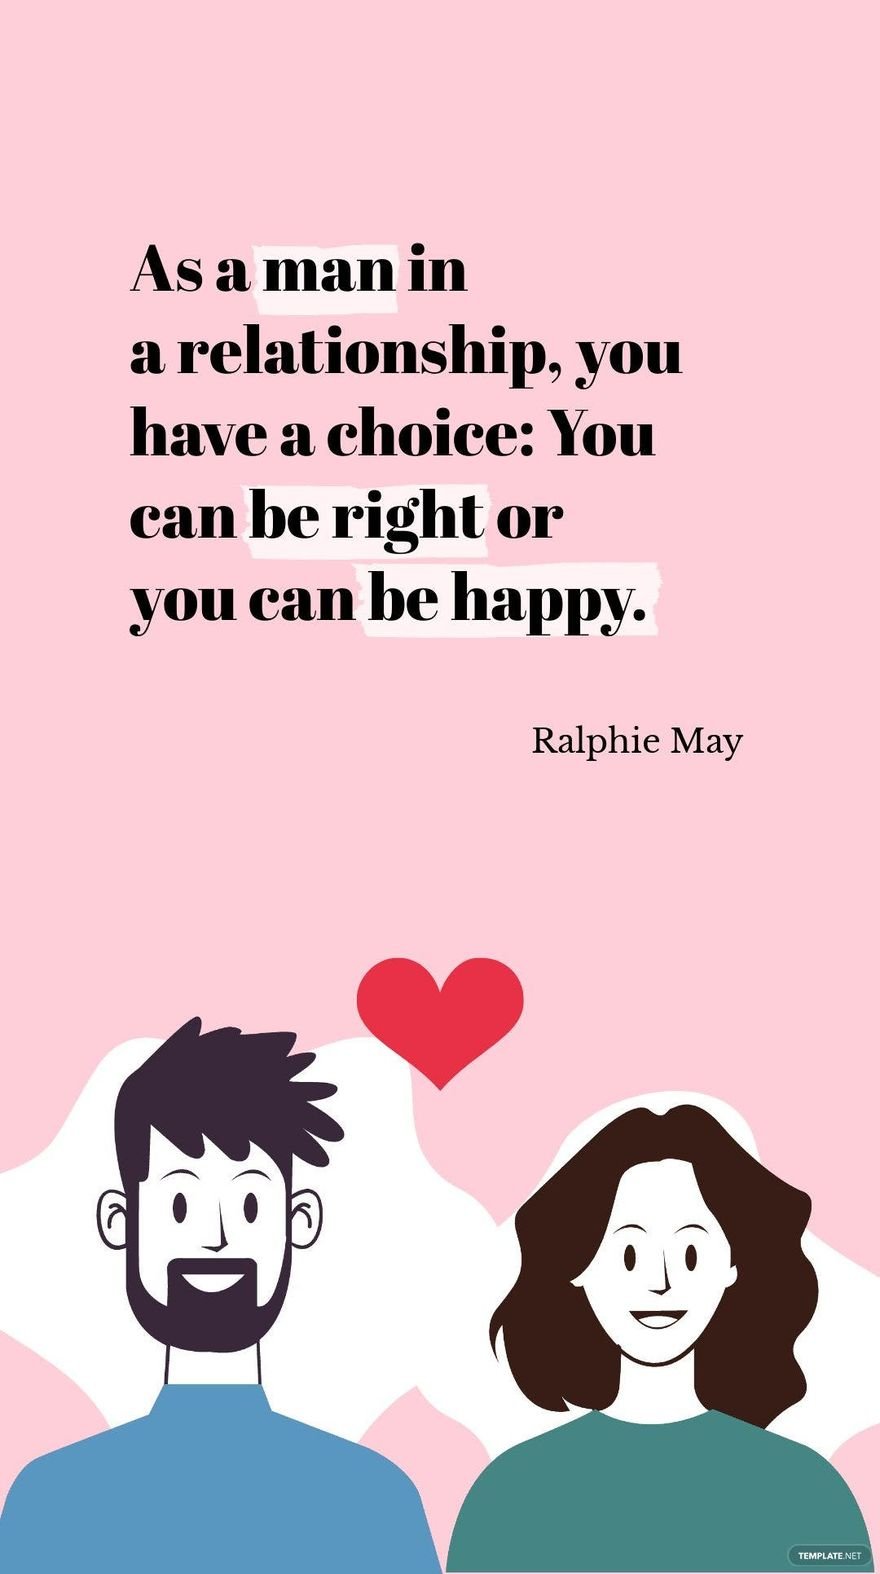 Ralphie May - “As a man in a relationship, you have a choice: You can be right or you can be happy.”